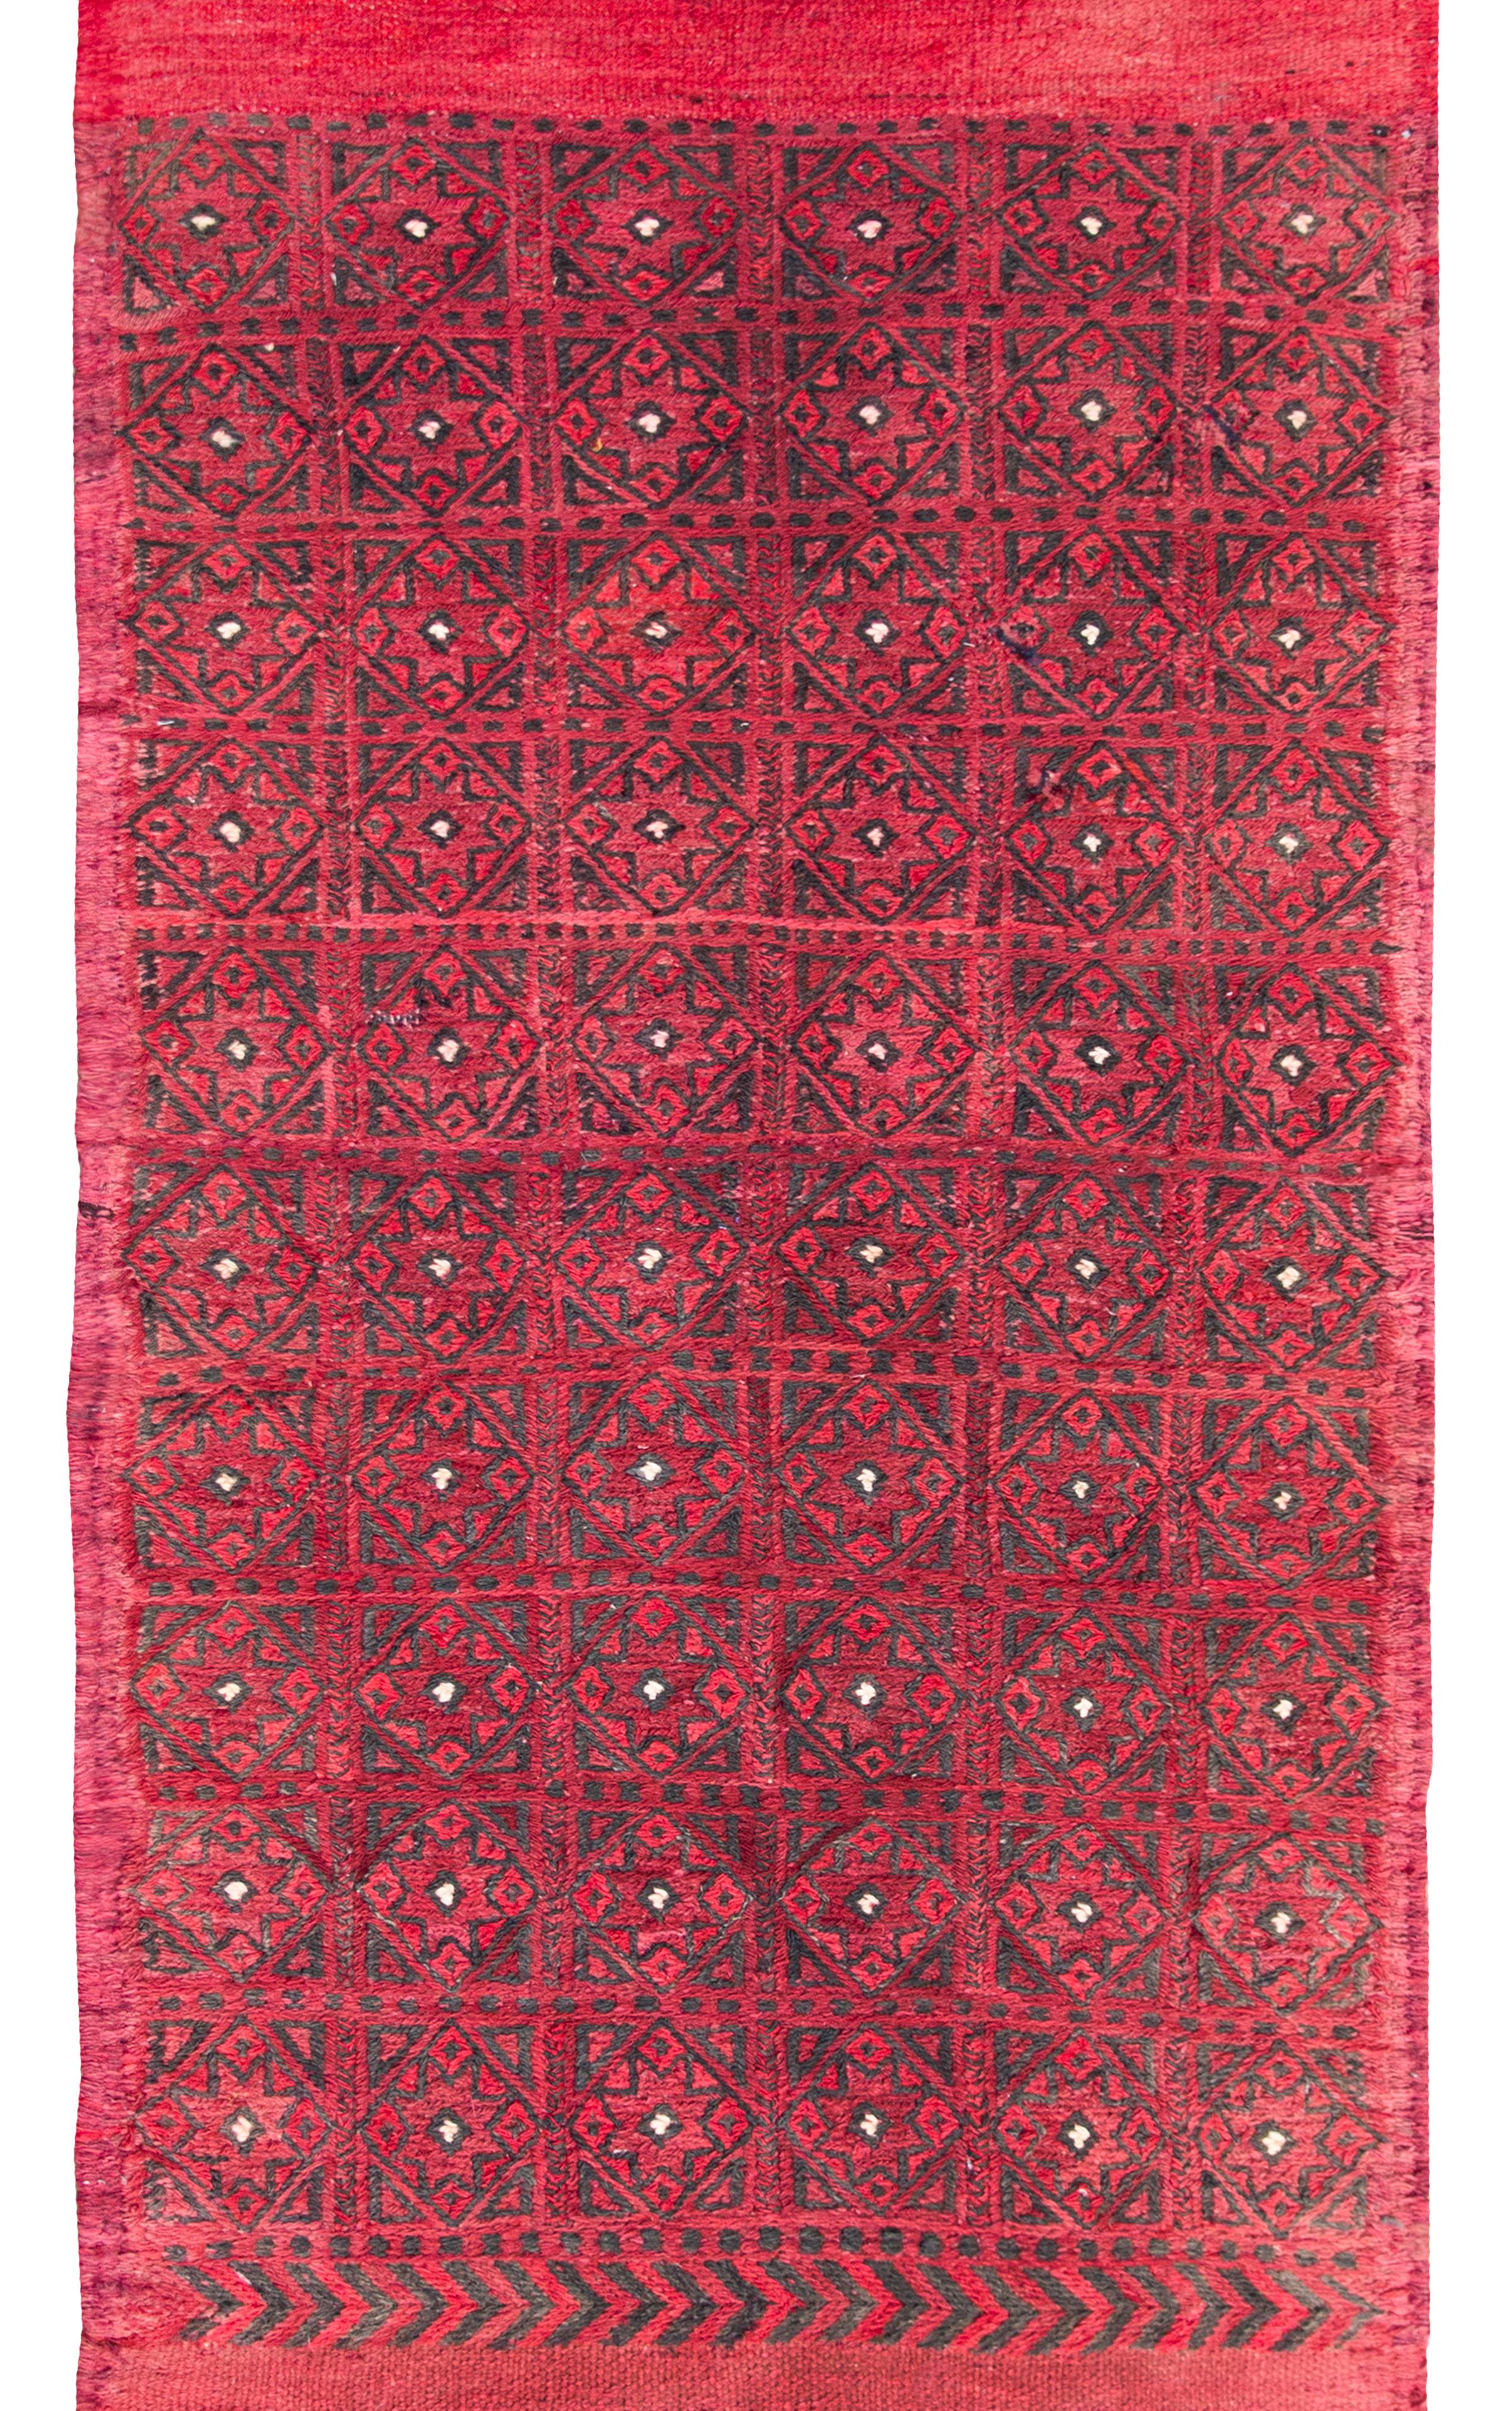 A bold vintage mid-20th century Turkish Kilim runner with a repeated diamond pattern set against a crimson background with an asymmetrical fringe border, one side with a chevron pattern and the other with two black stripes.  